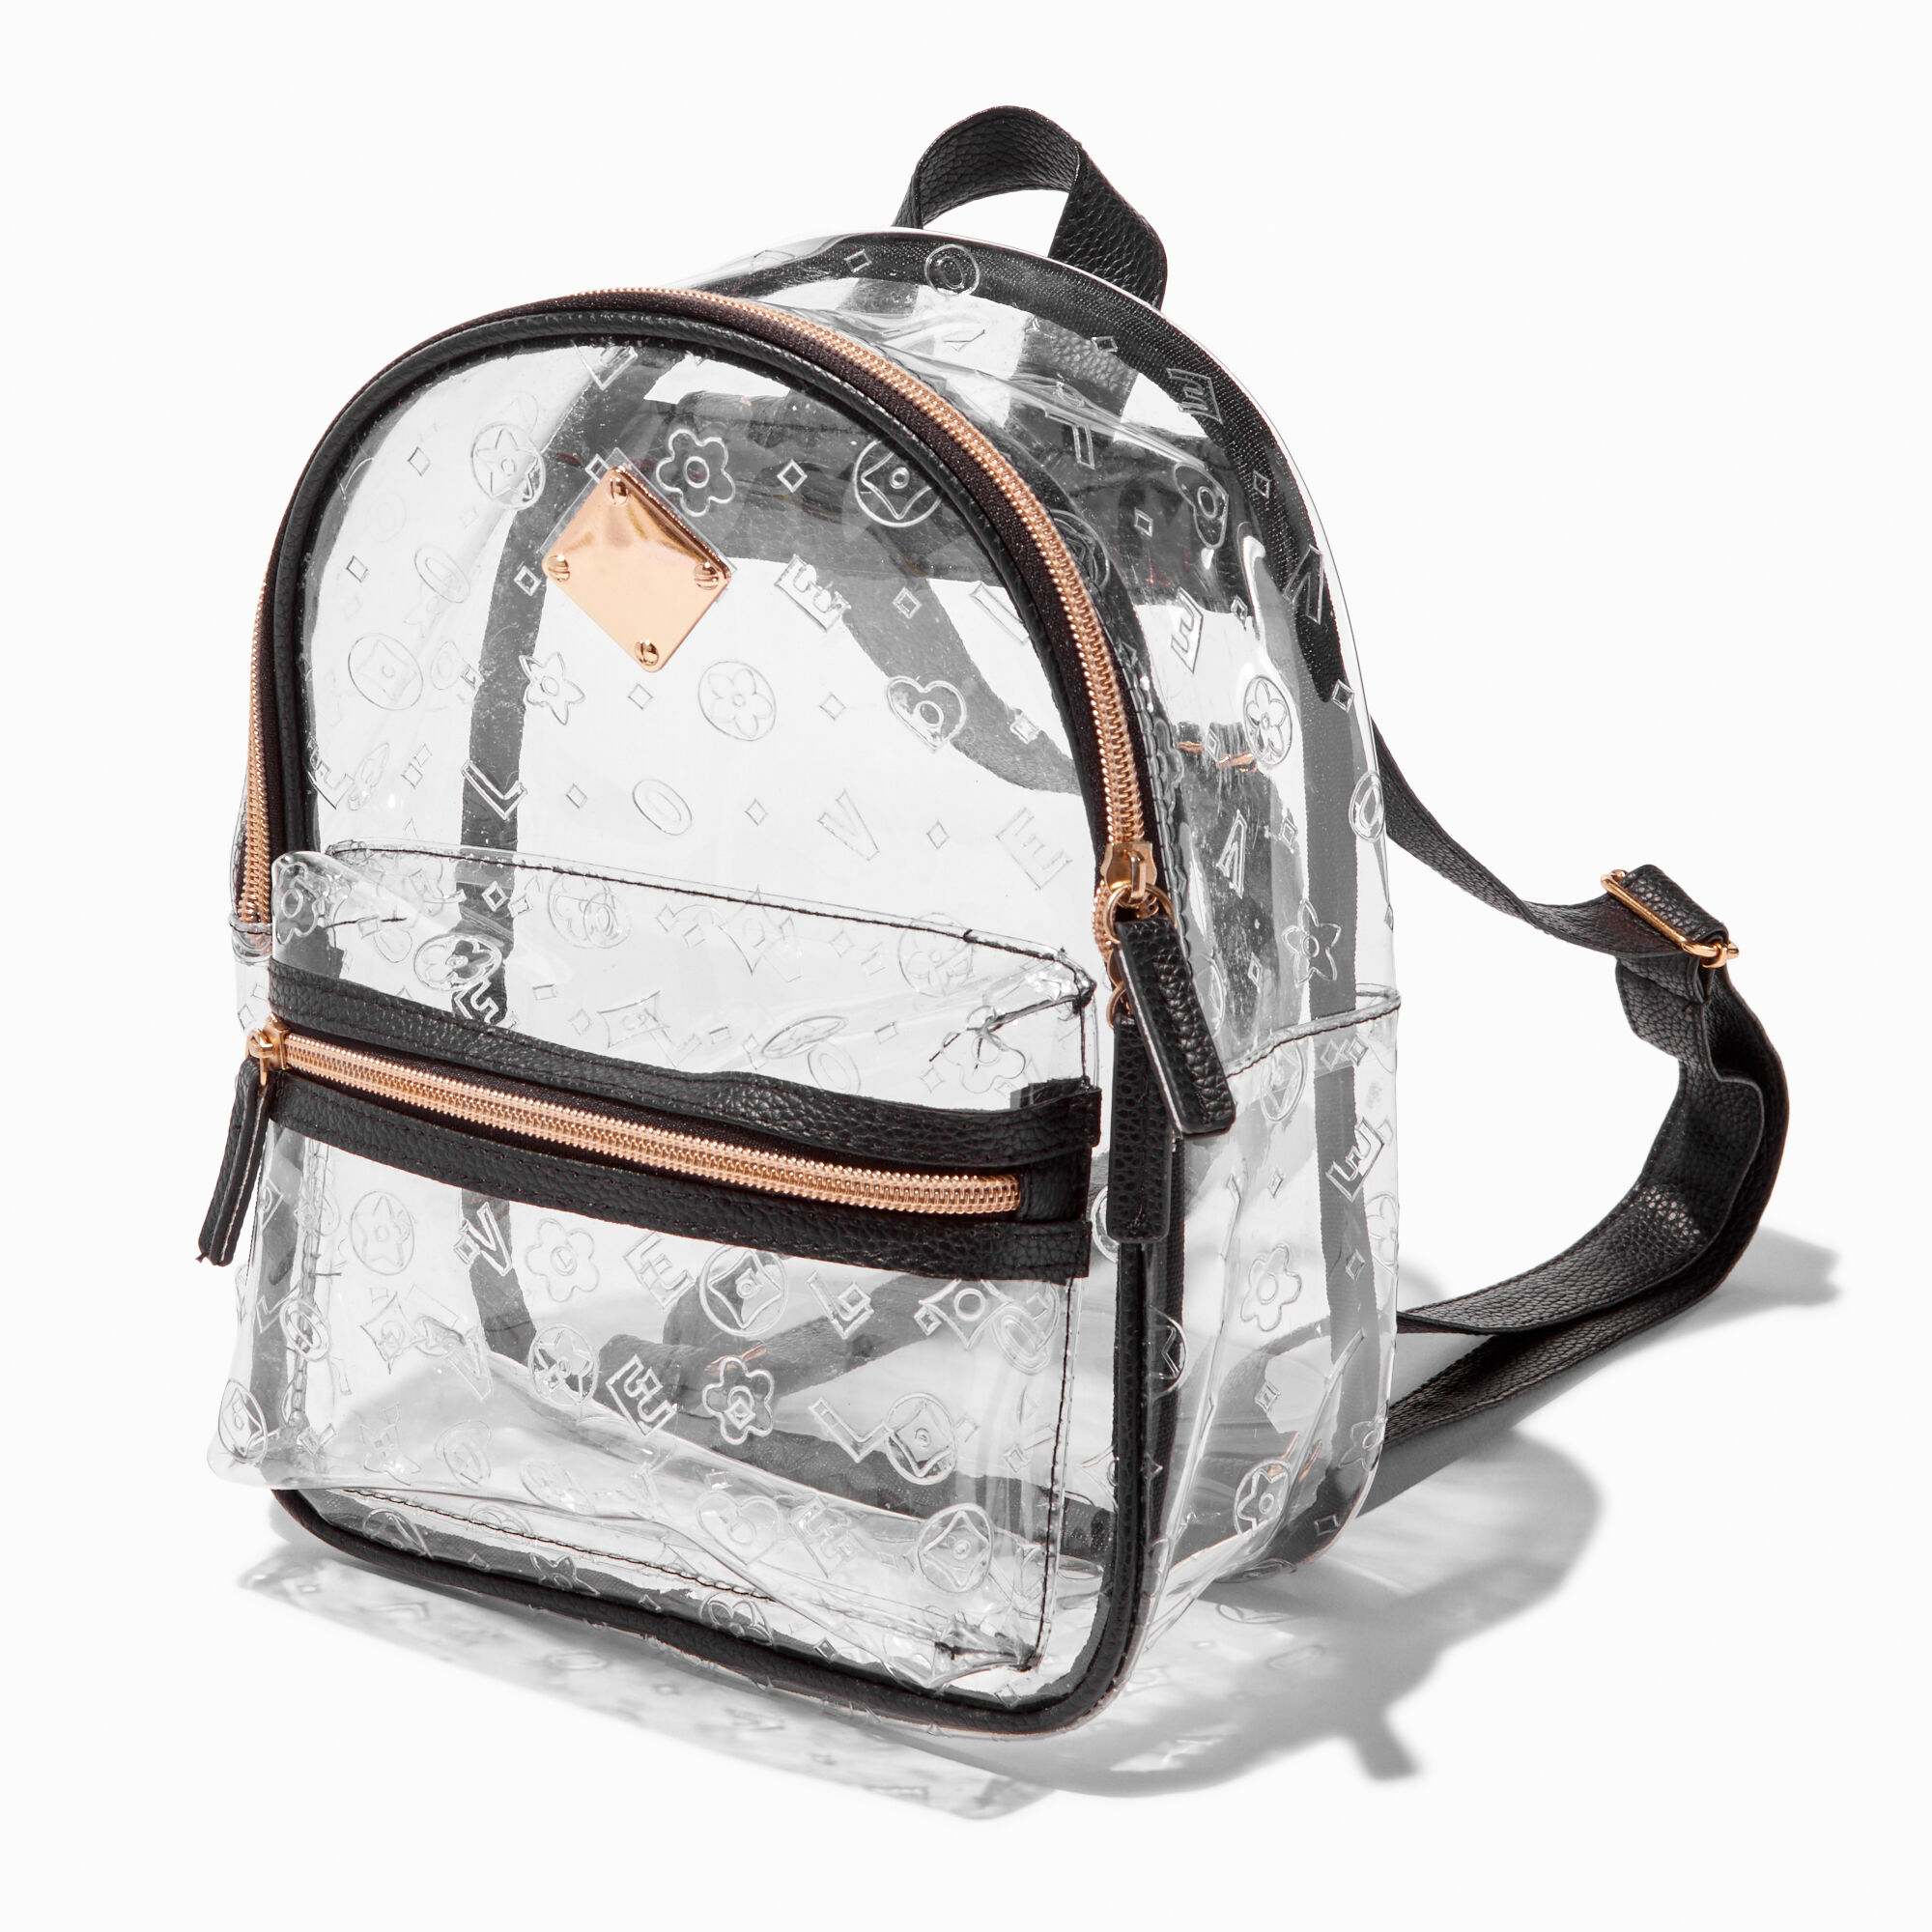 View Claires Status Icons Clear Medium Backpack Black information